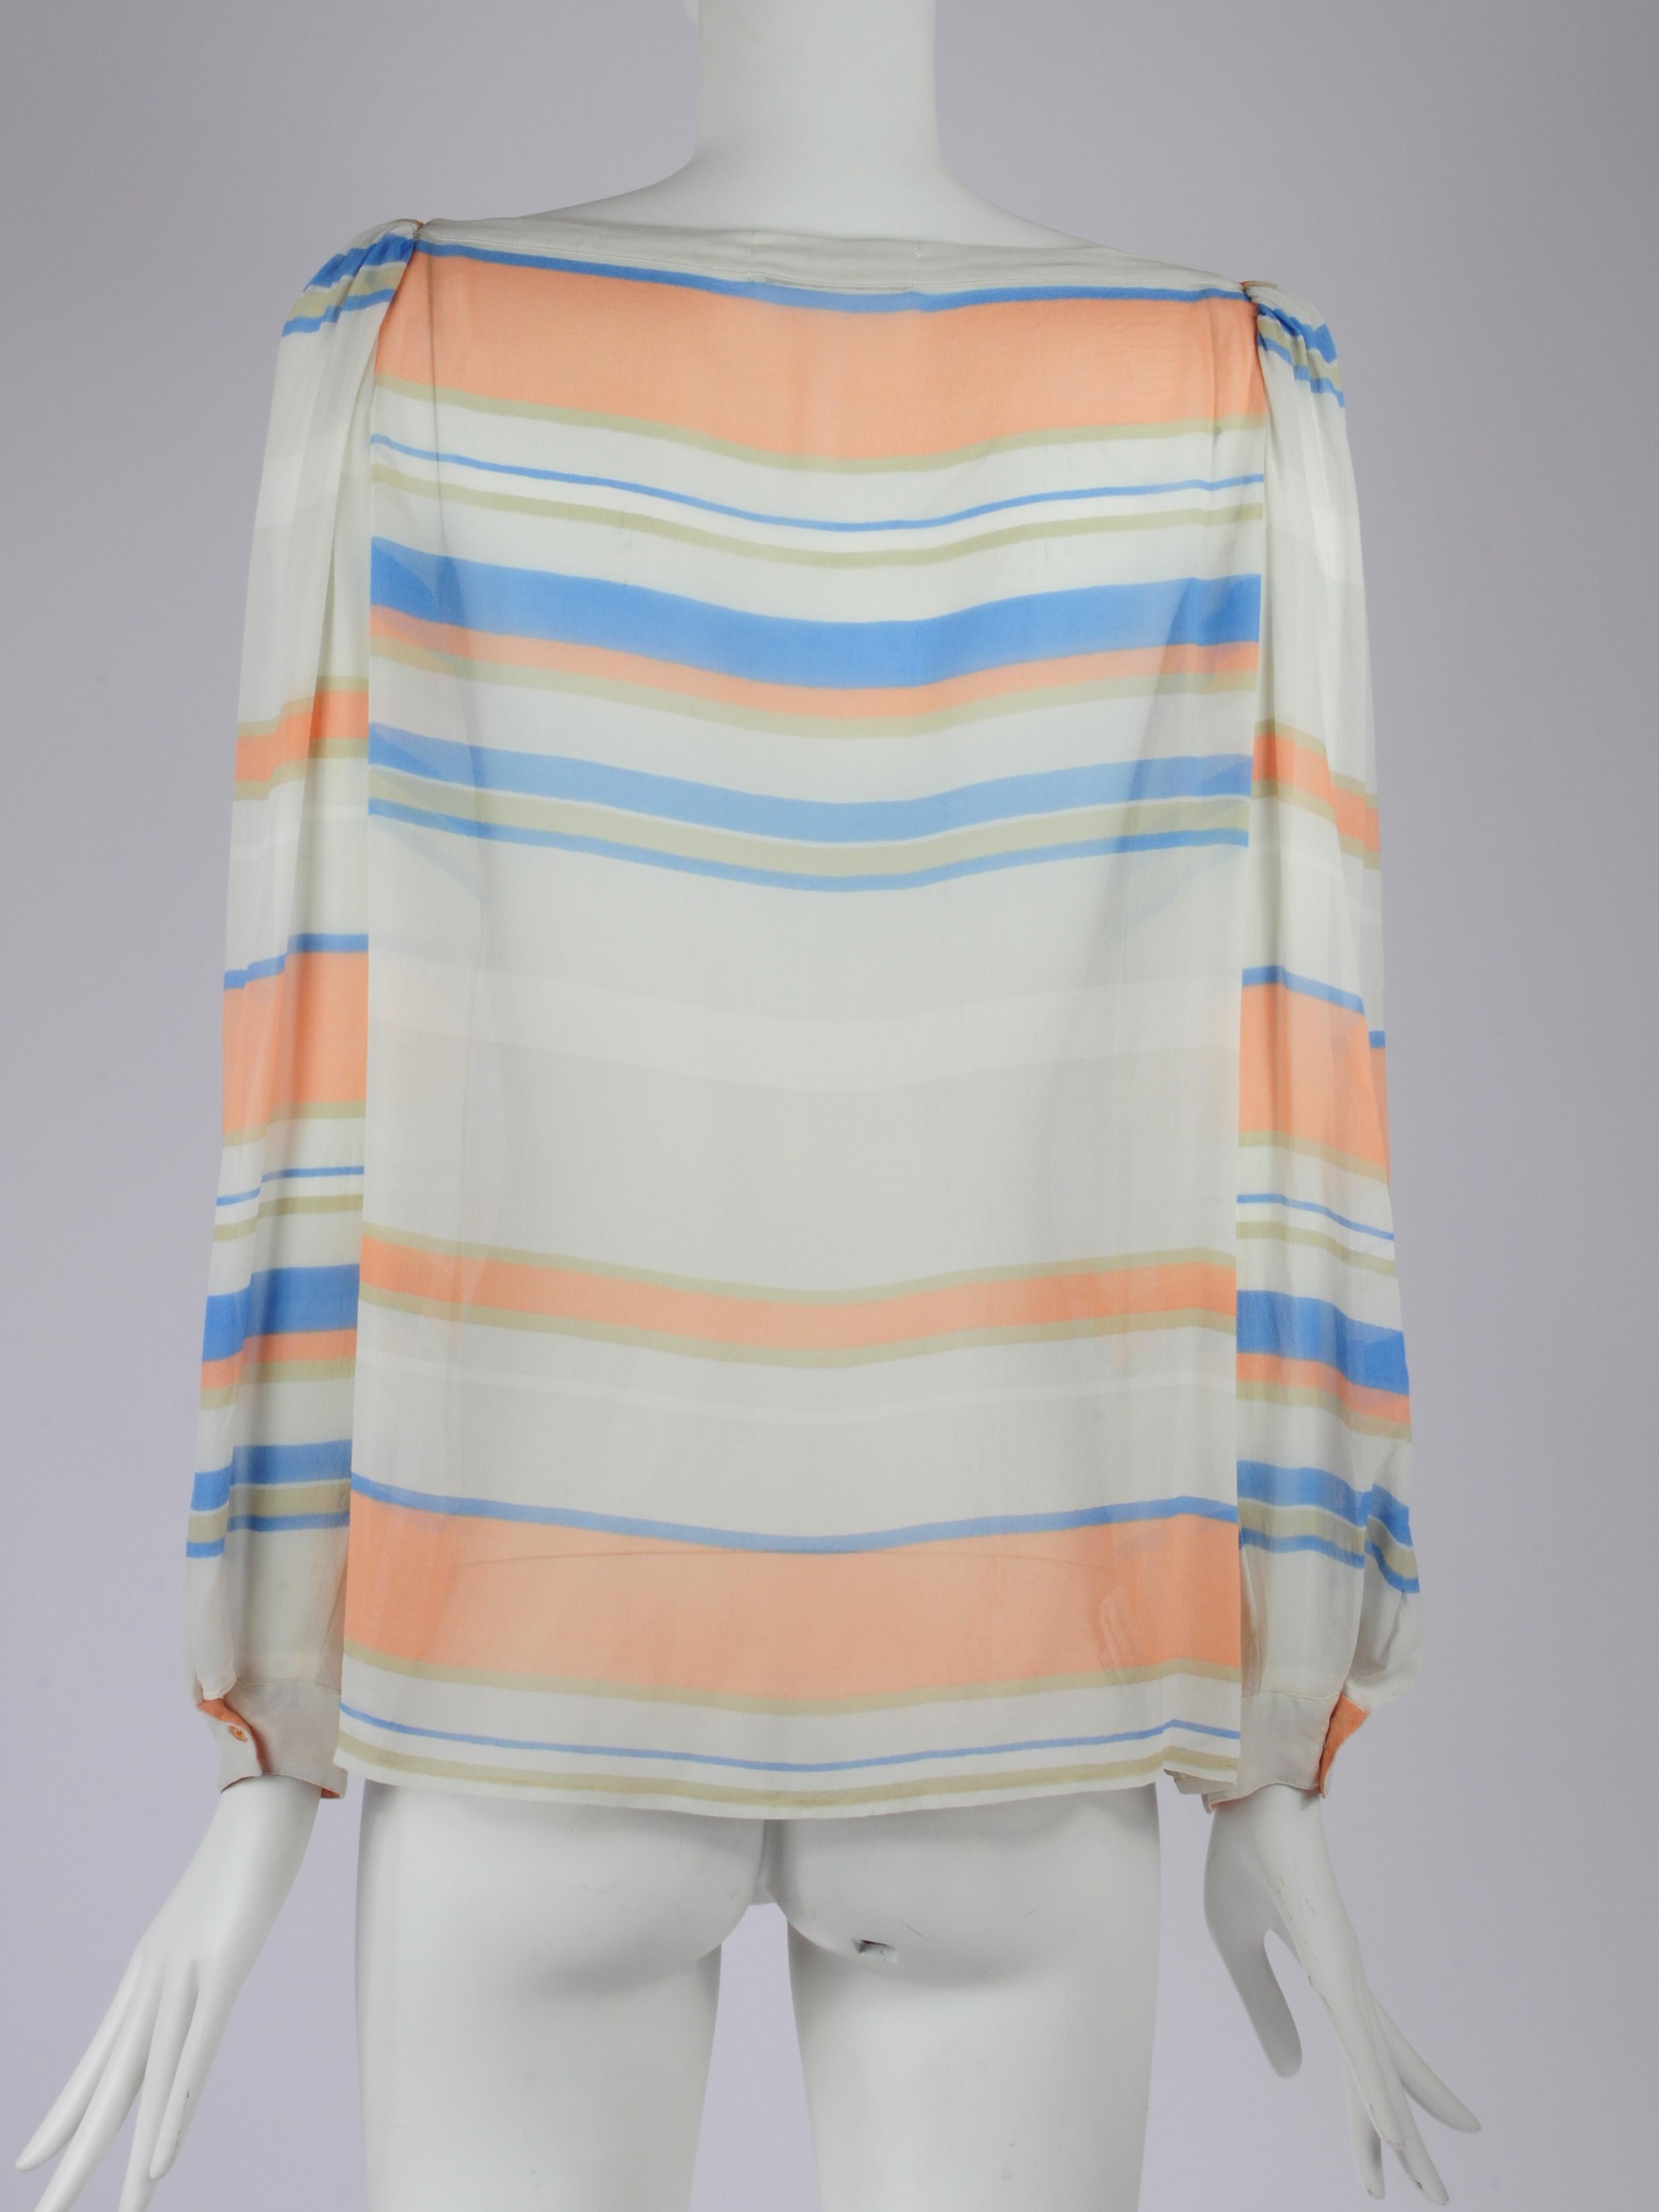 Christian Dior Silk Striped Blouse with Volant Detail by Marc Bohan 1970s For Sale 9